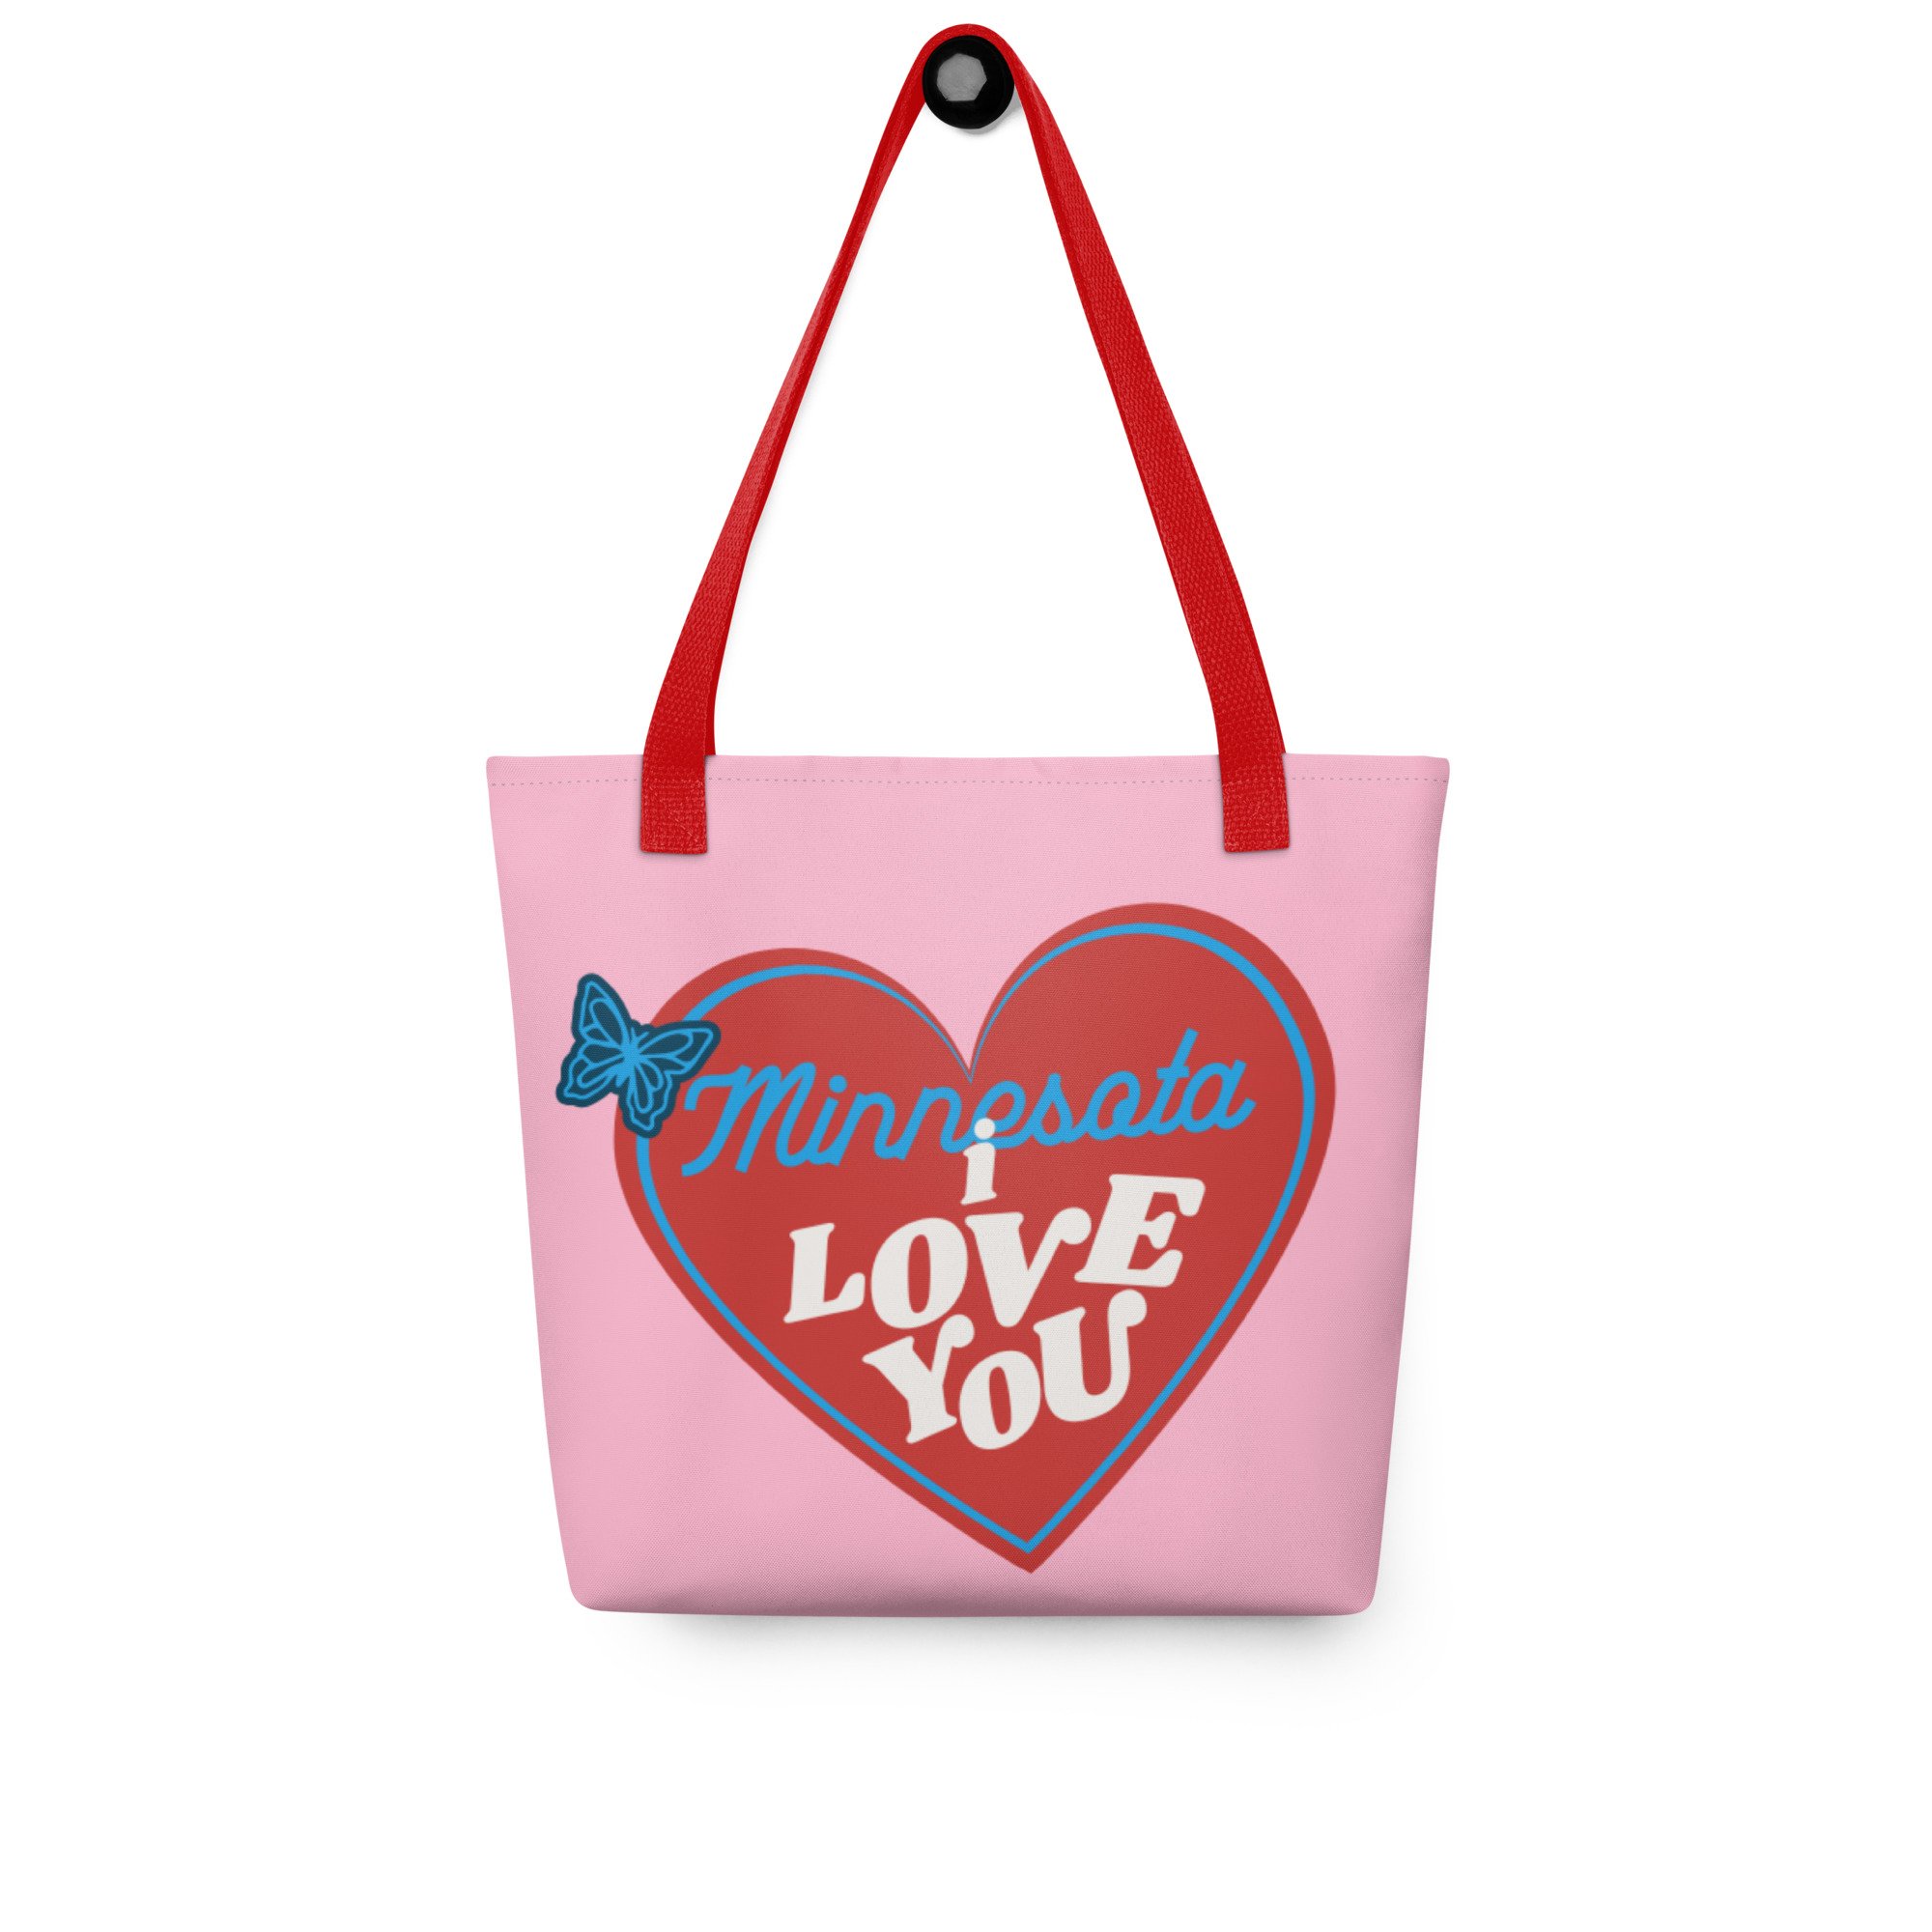 Just A Girl Who Loves Yarn Tote Bag for Sale by CroyleC